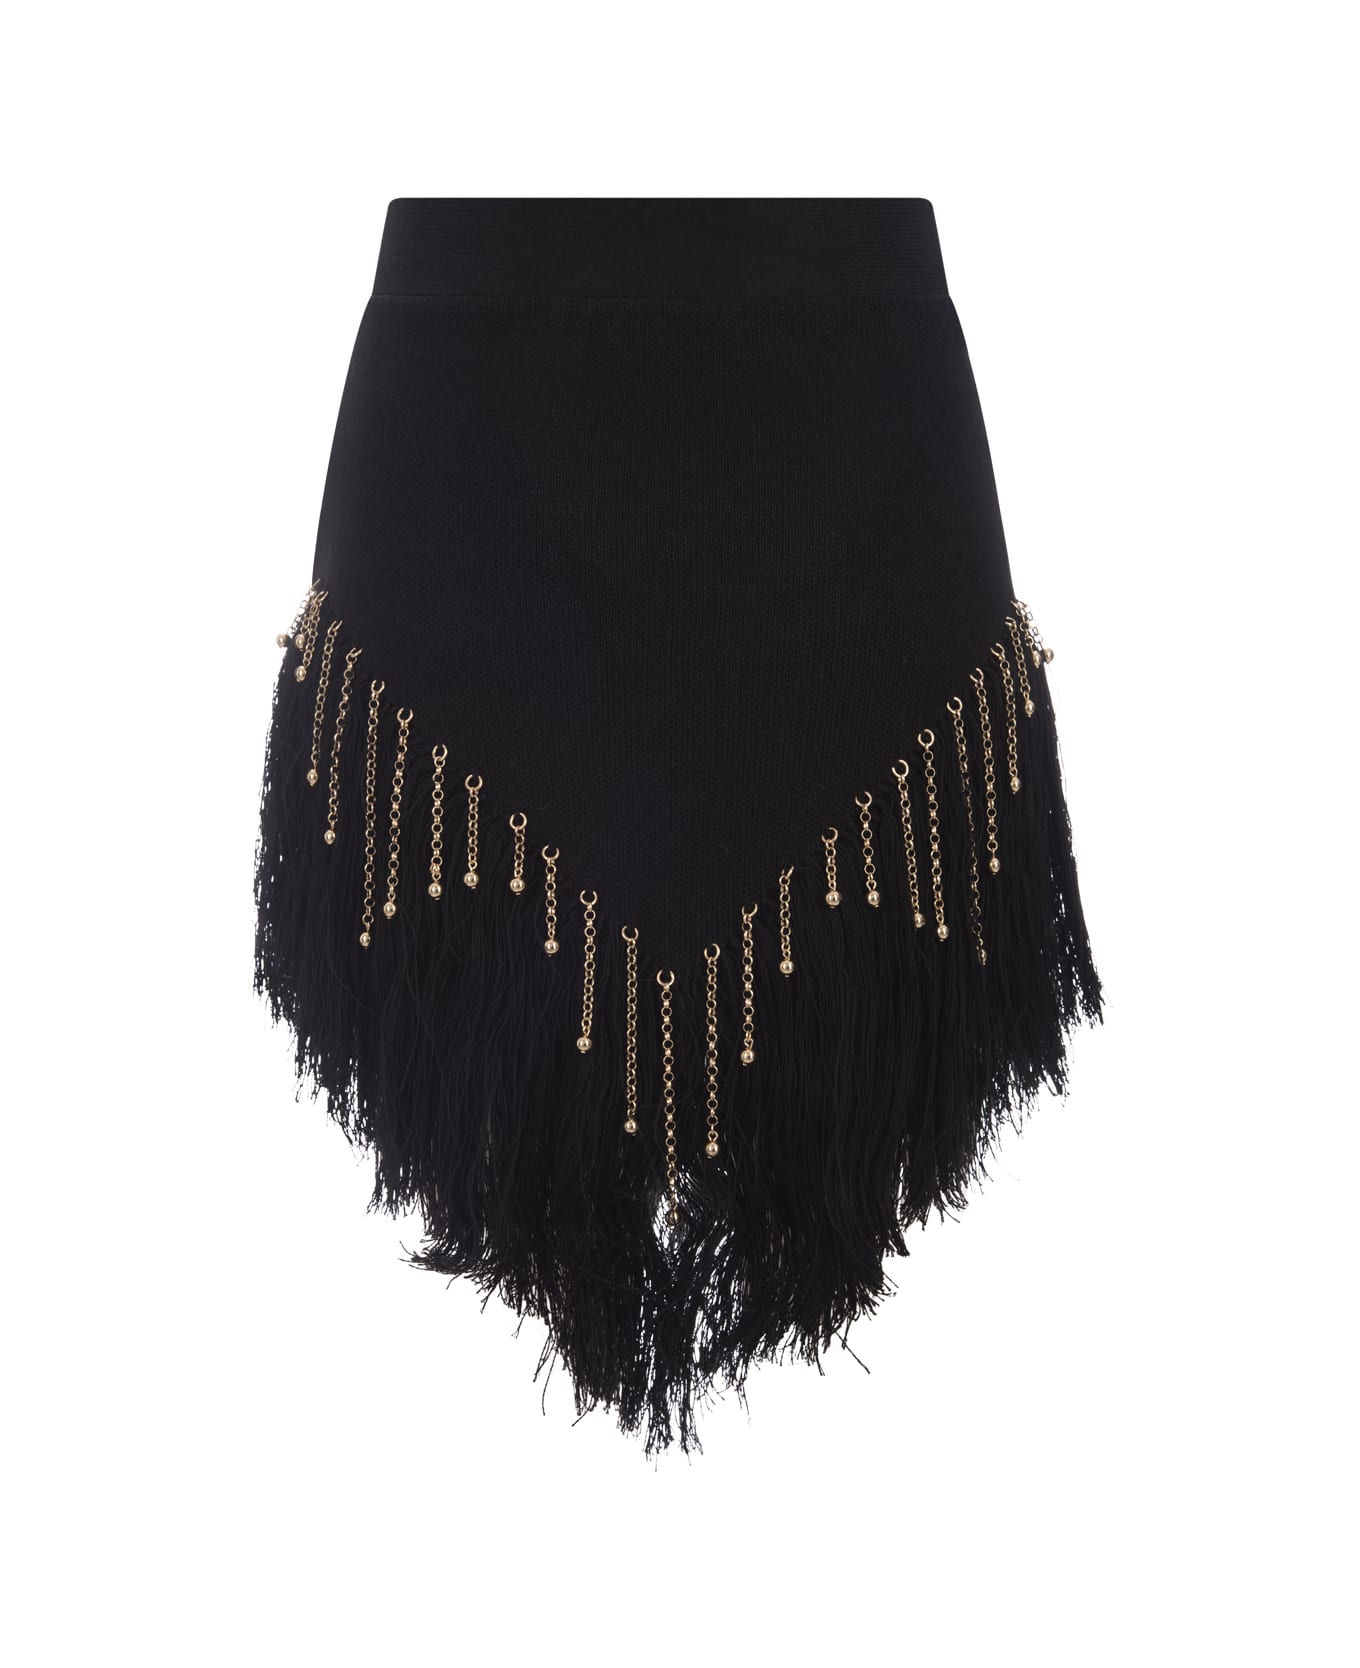 Paco Rabanne Black Woven Skirt With Knitted Beads And Feathers - Black